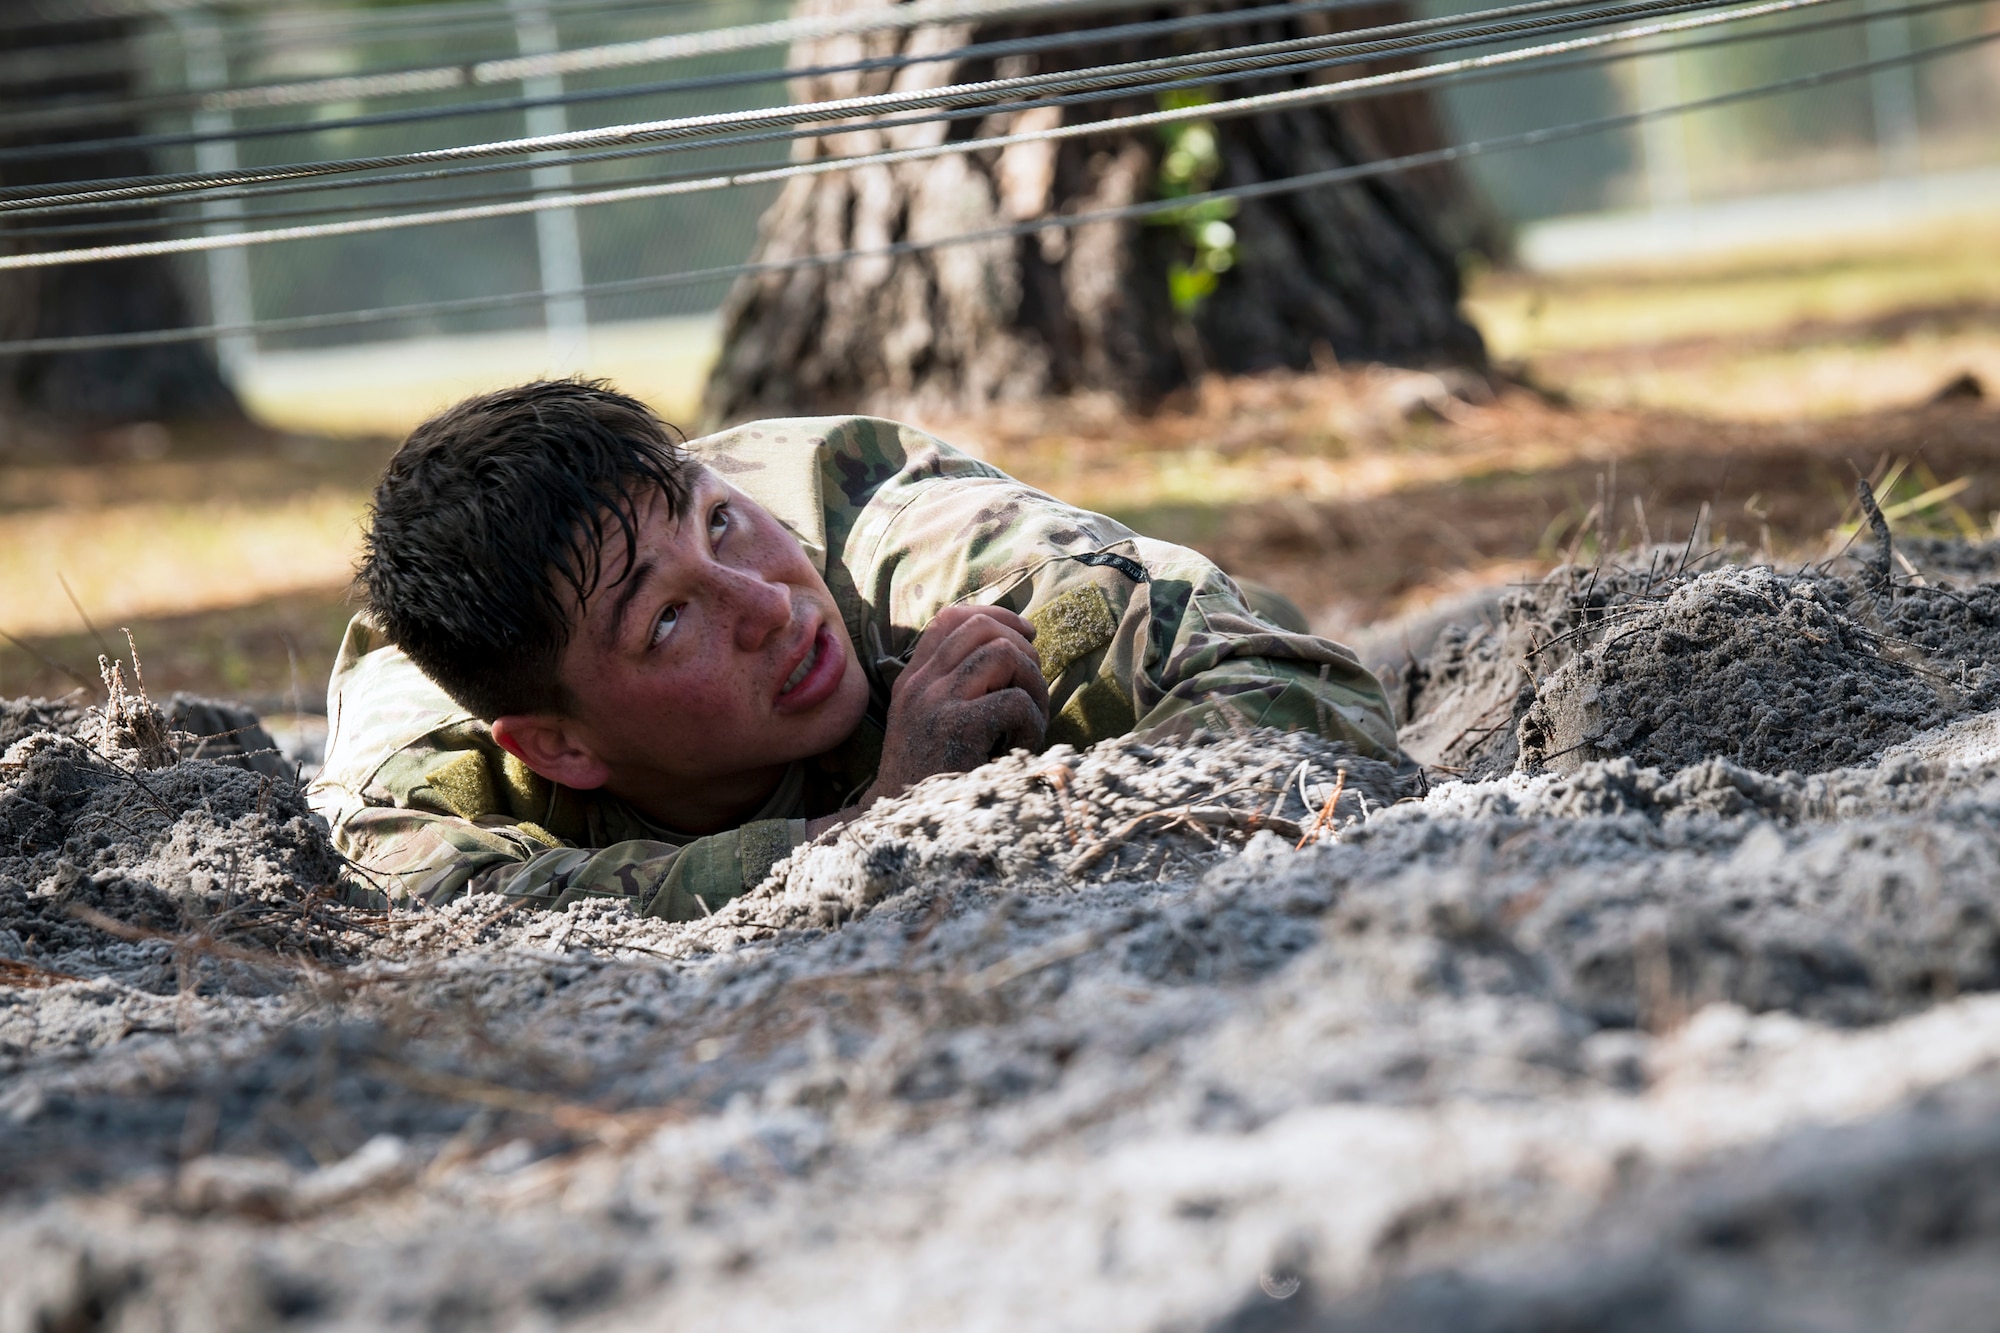 Senior Airman Shawn King, 823d Base Defense Squadron fireteam member, low crawls through an obstacle during an Army Air Assault Assessment (AAA), Jan. 20, 2019, at Camp Blanding, Fla. The AAA is designed to determine Airmen’s physical and mental readiness before being selected to attend Army Air Assault school. (U.S. Air Force photo by Airman First Class Eugene Oliver)